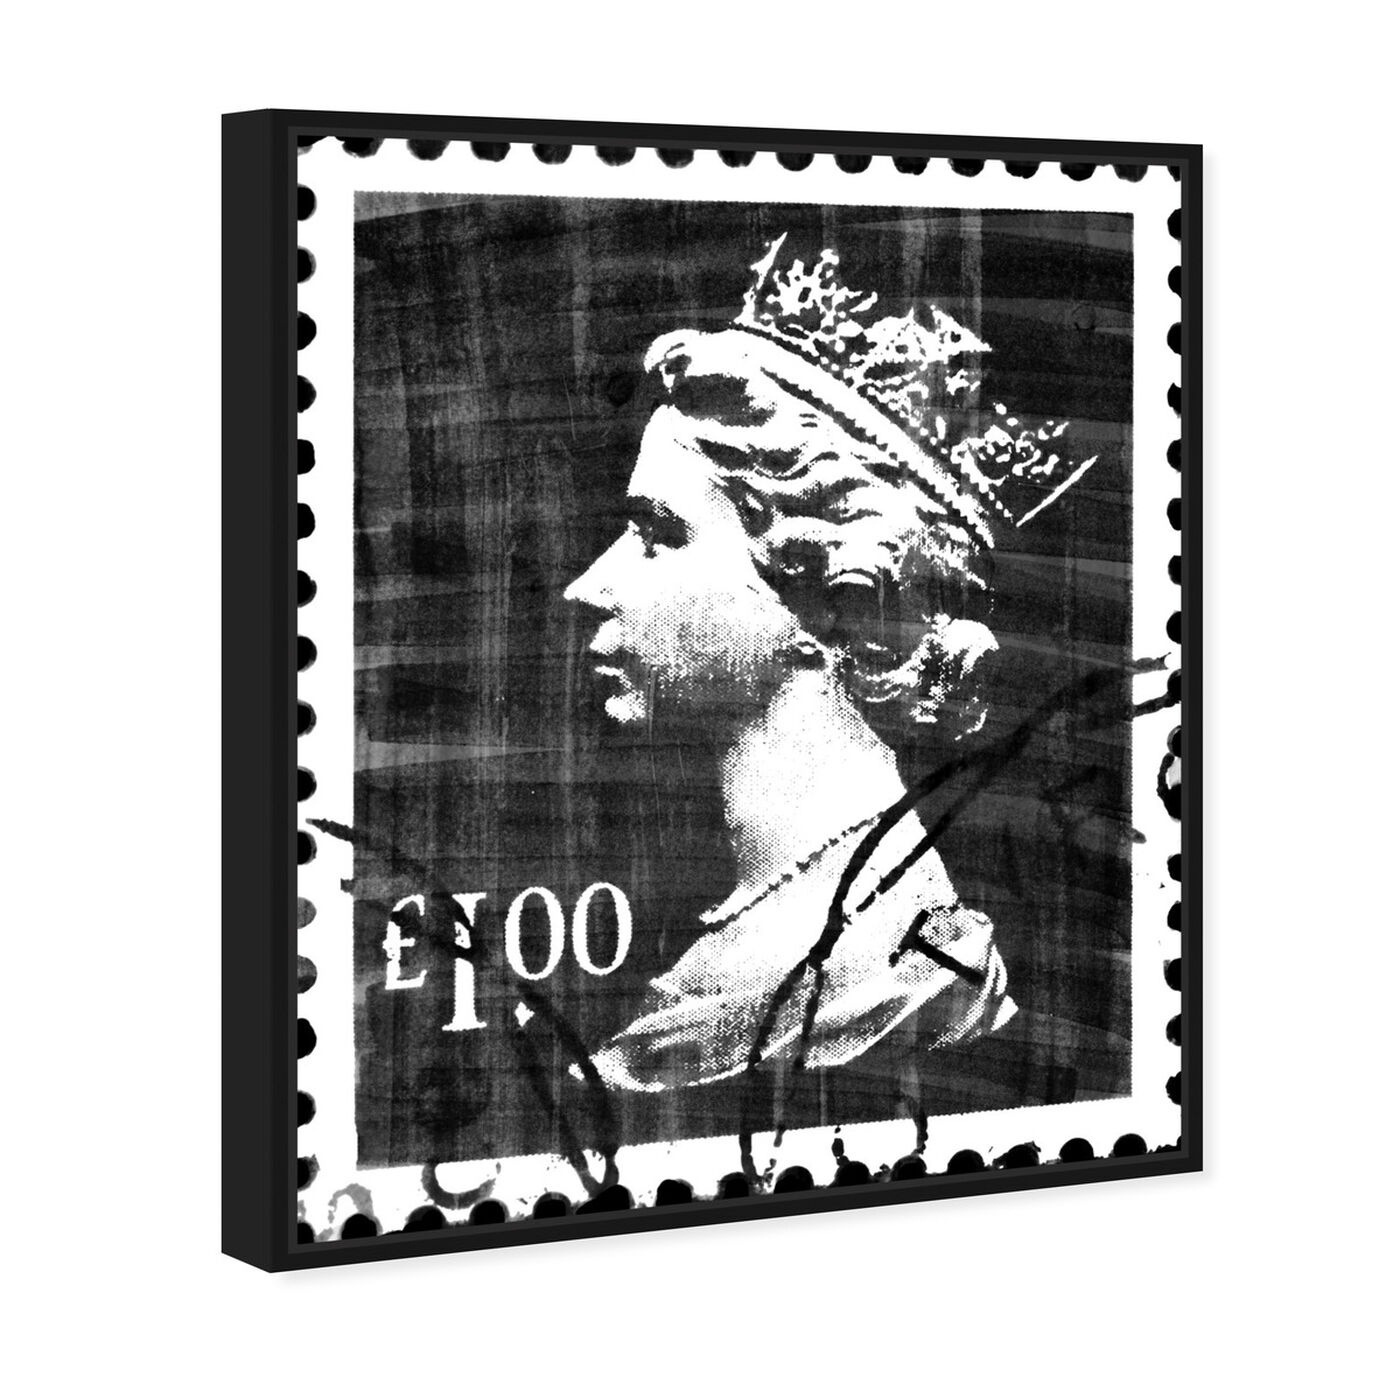 Angled view of Save The Queen Two featuring advertising and posters art.